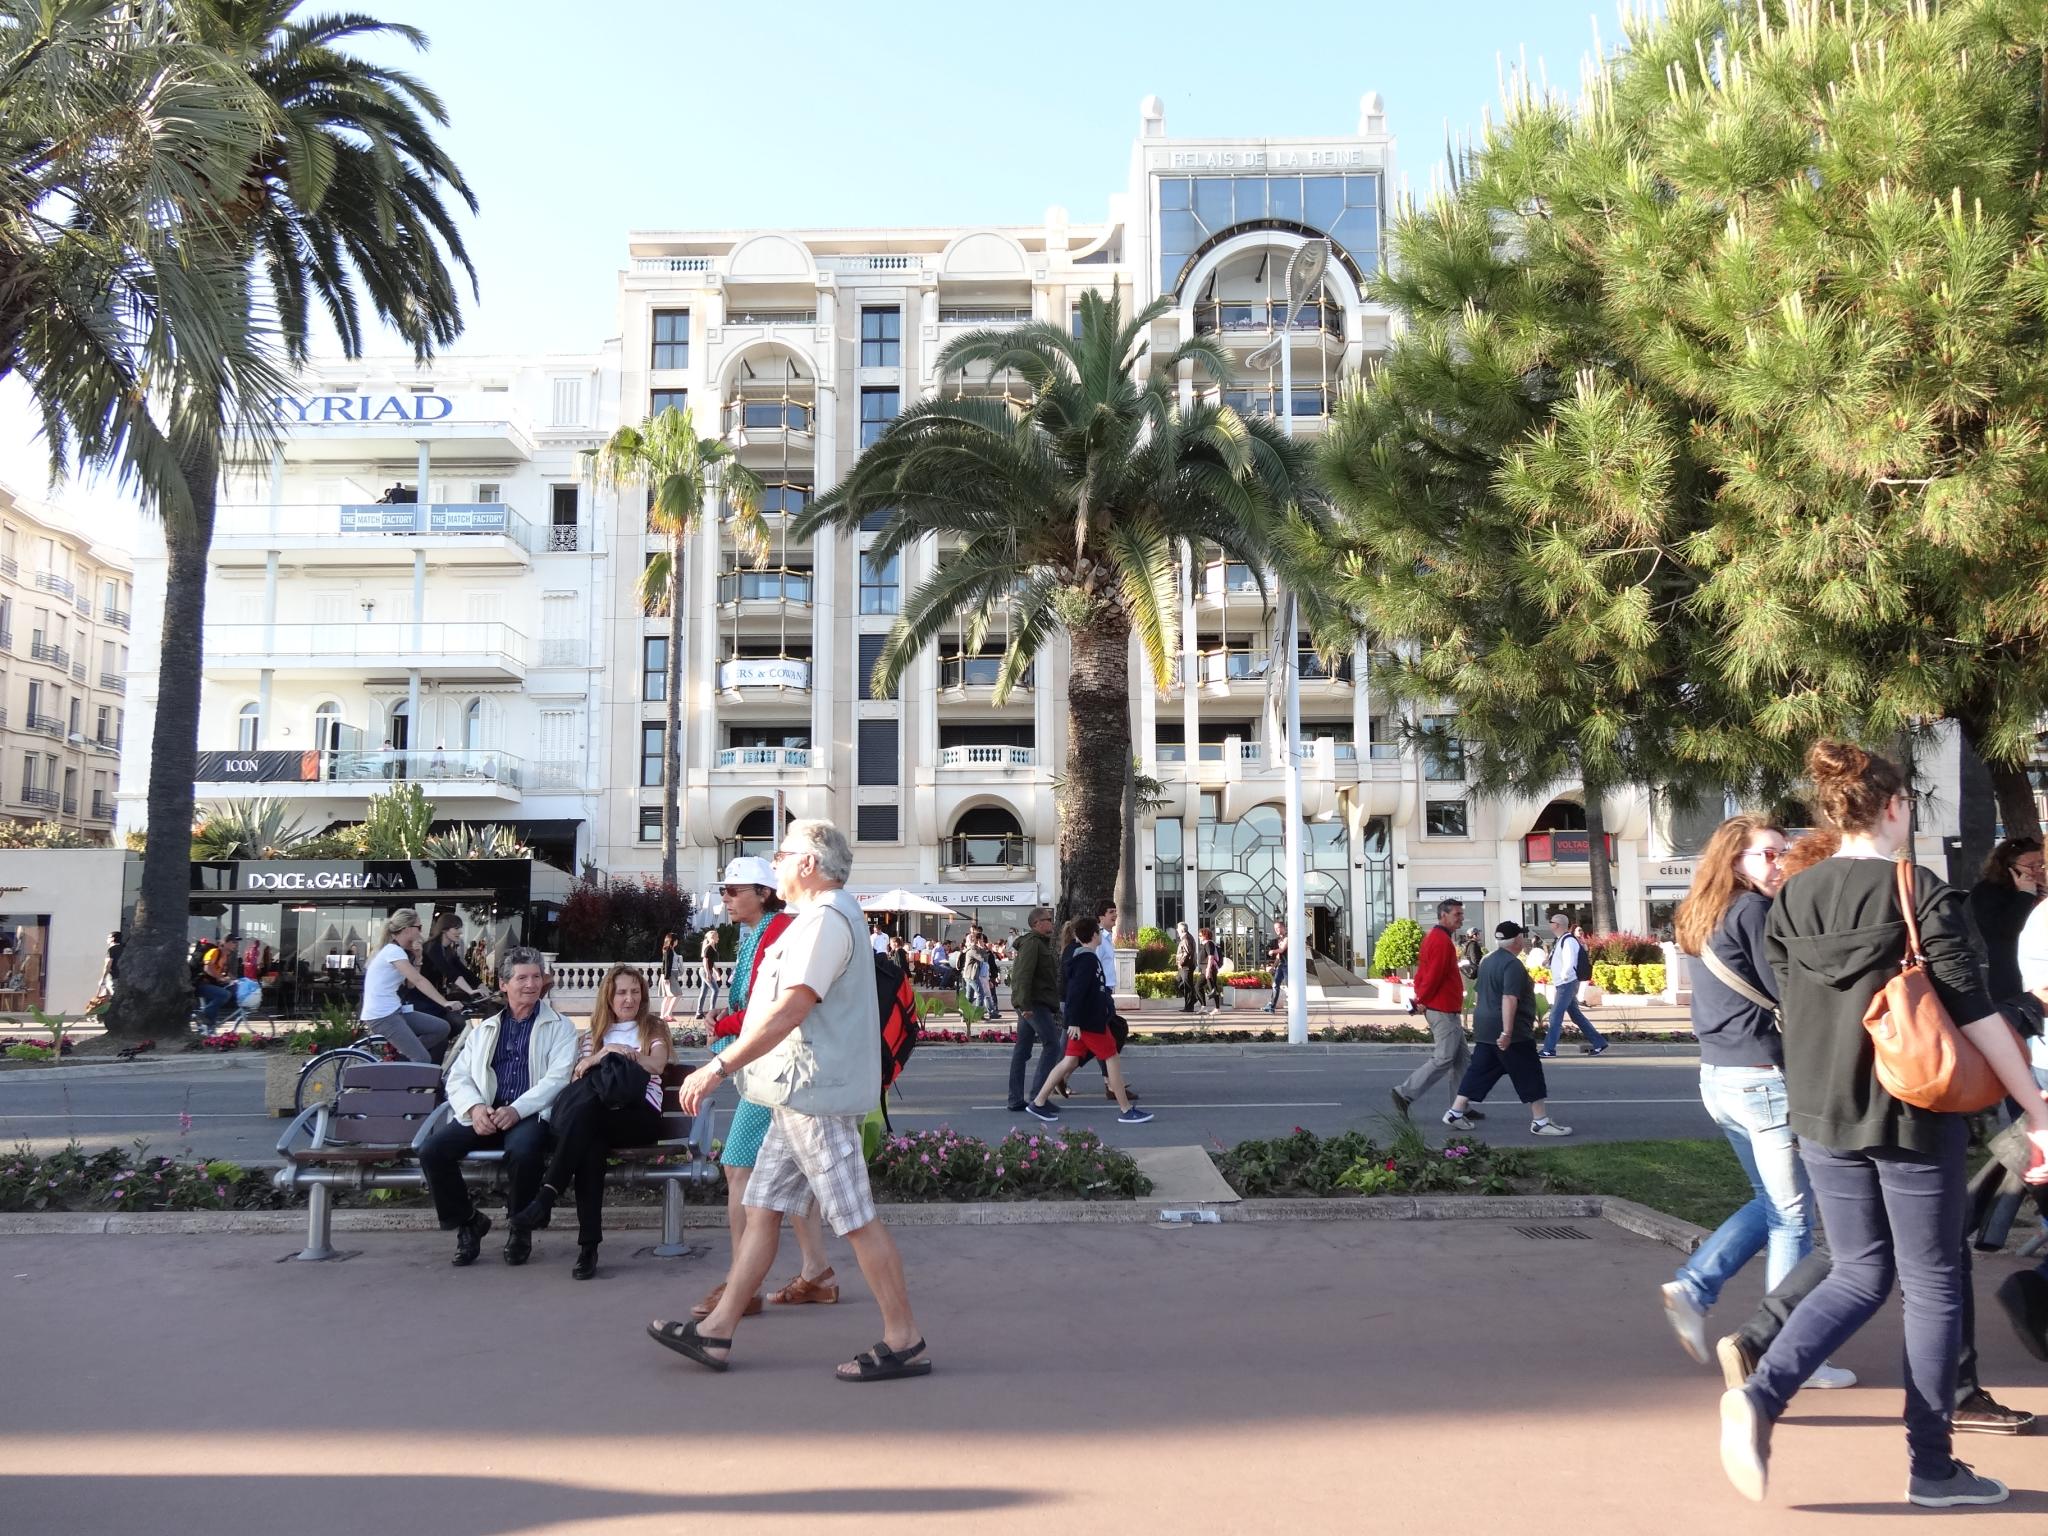 a group of people walk through the city with palm trees